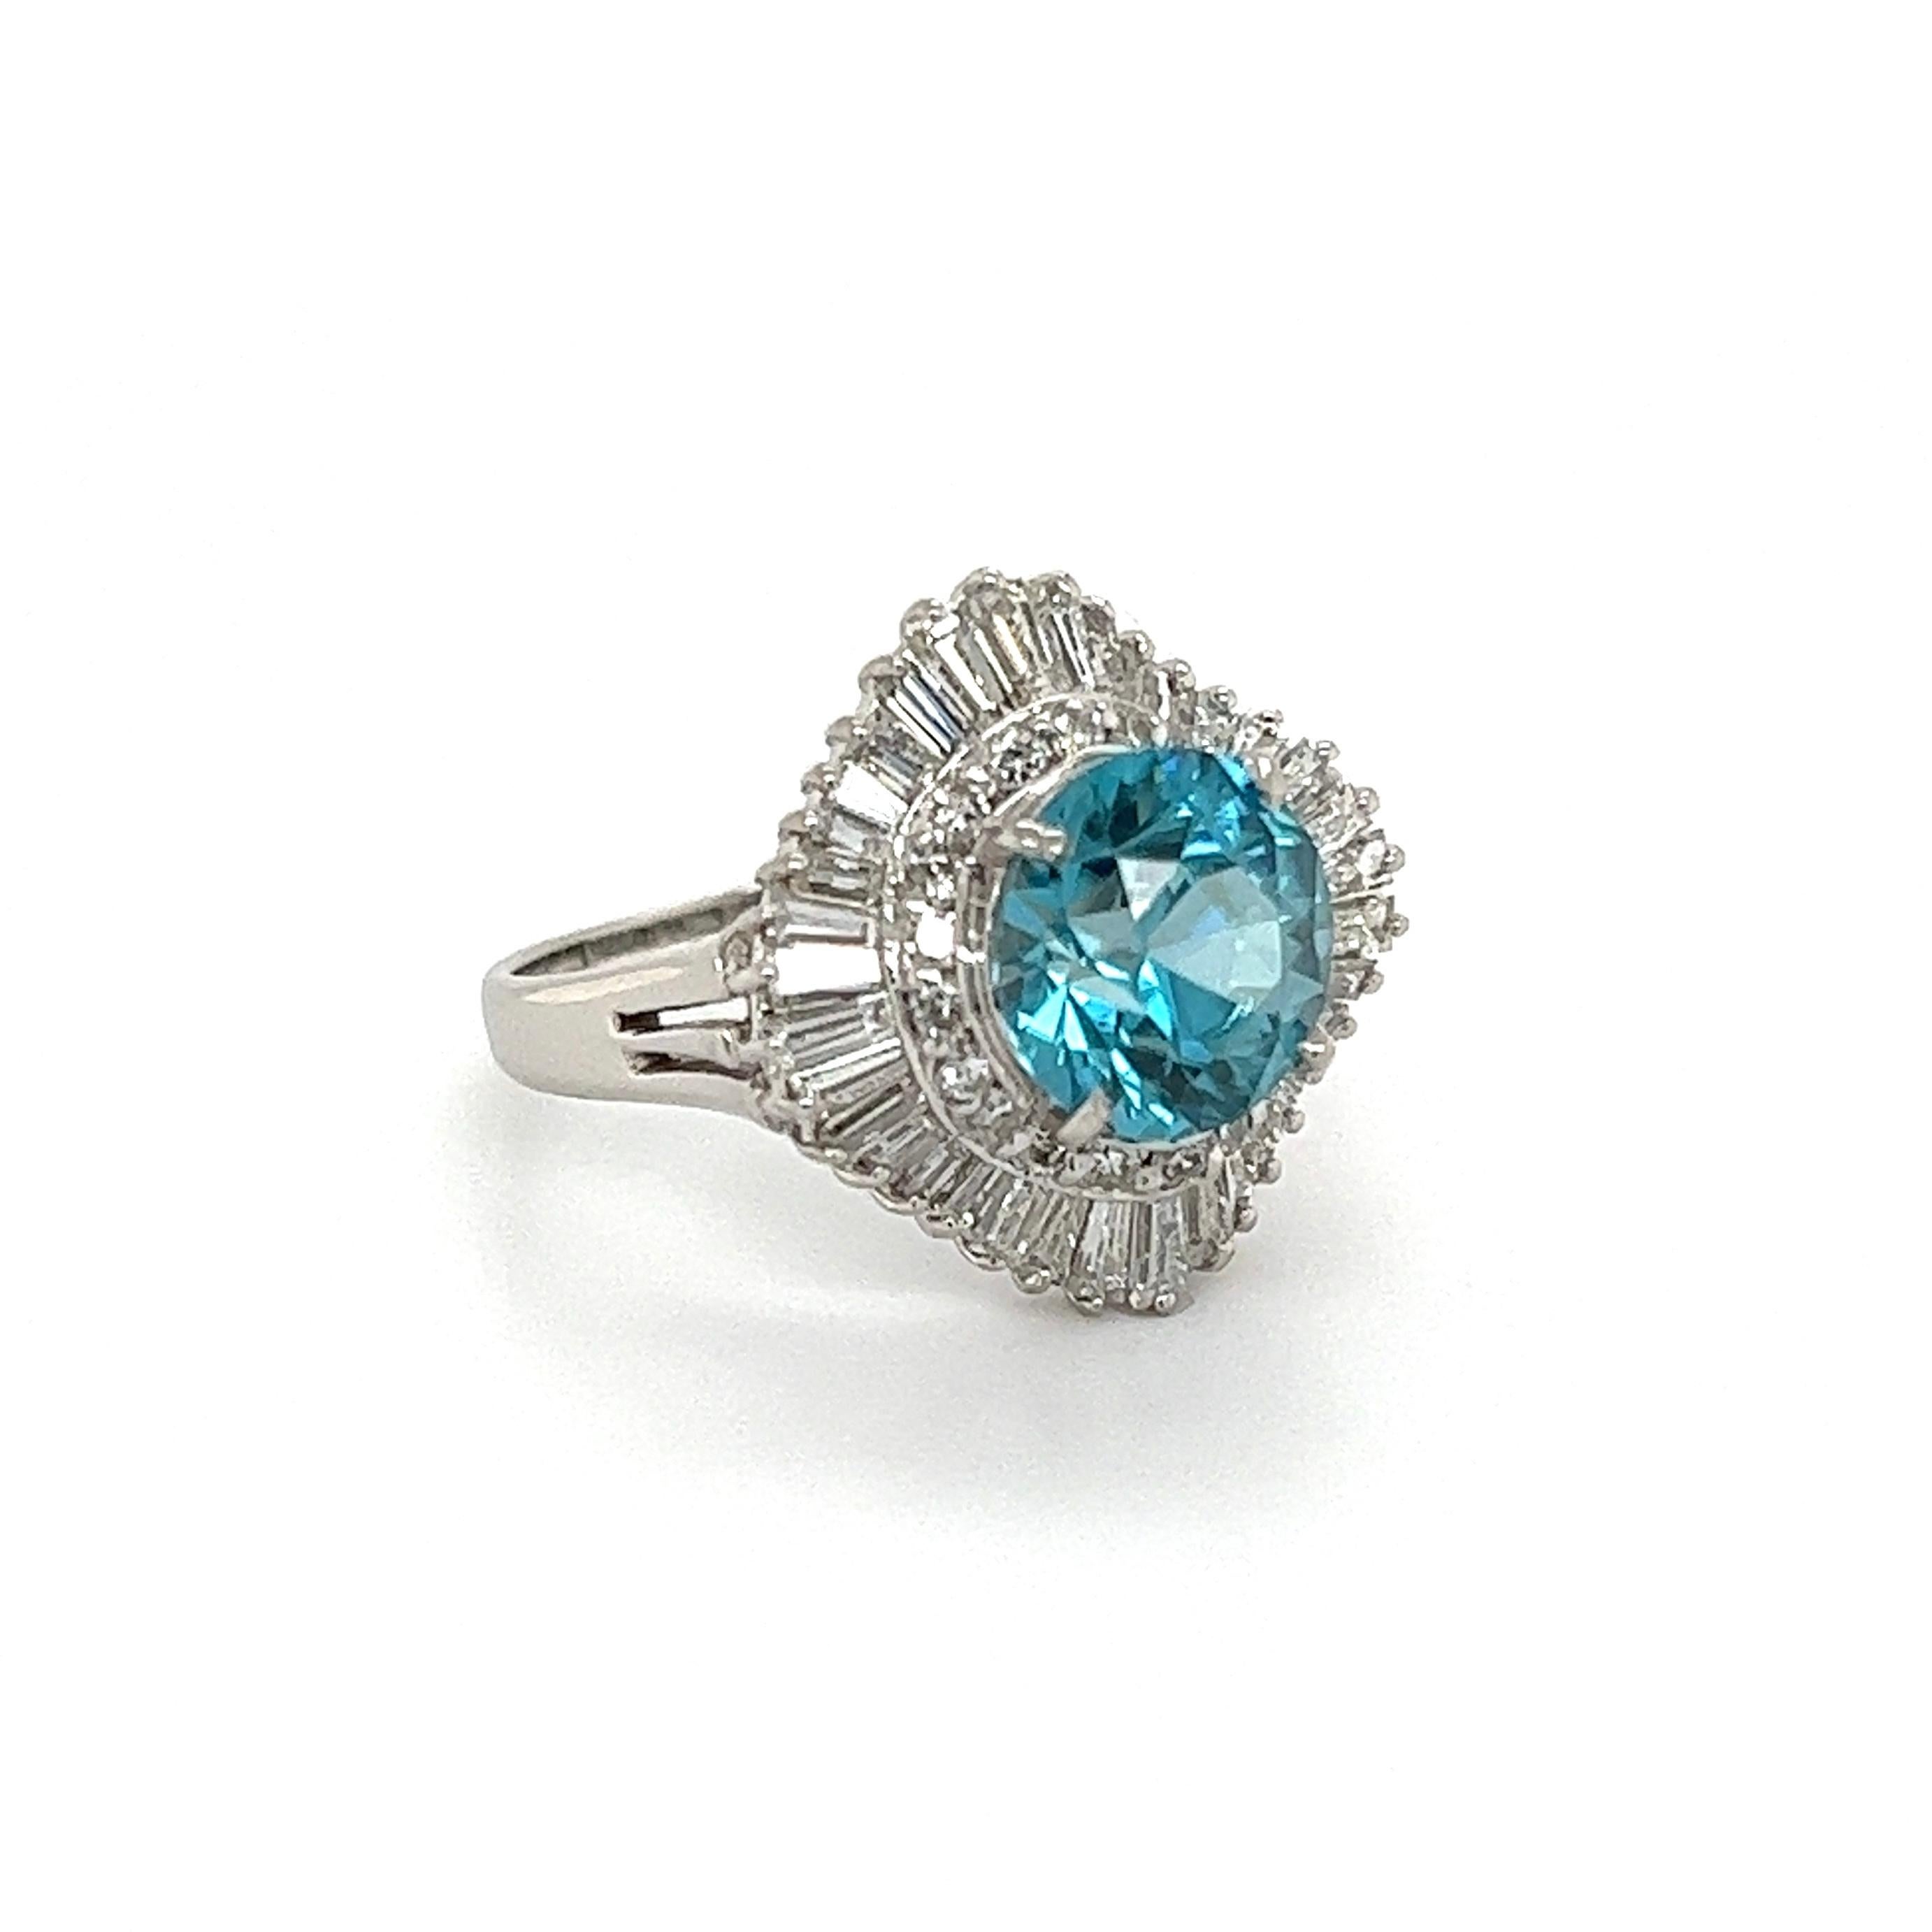 Simply Beautiful! Finely detailed Blue Zircon and Diamond Ballerina Ring. Centering a securely nestled Hand set awesome 3.56 Carat Blue Zircon, surrounded by Diamonds, weighing approx. 1.18tcw. Hand crafted Platinum mounting. Approx. dimensions: